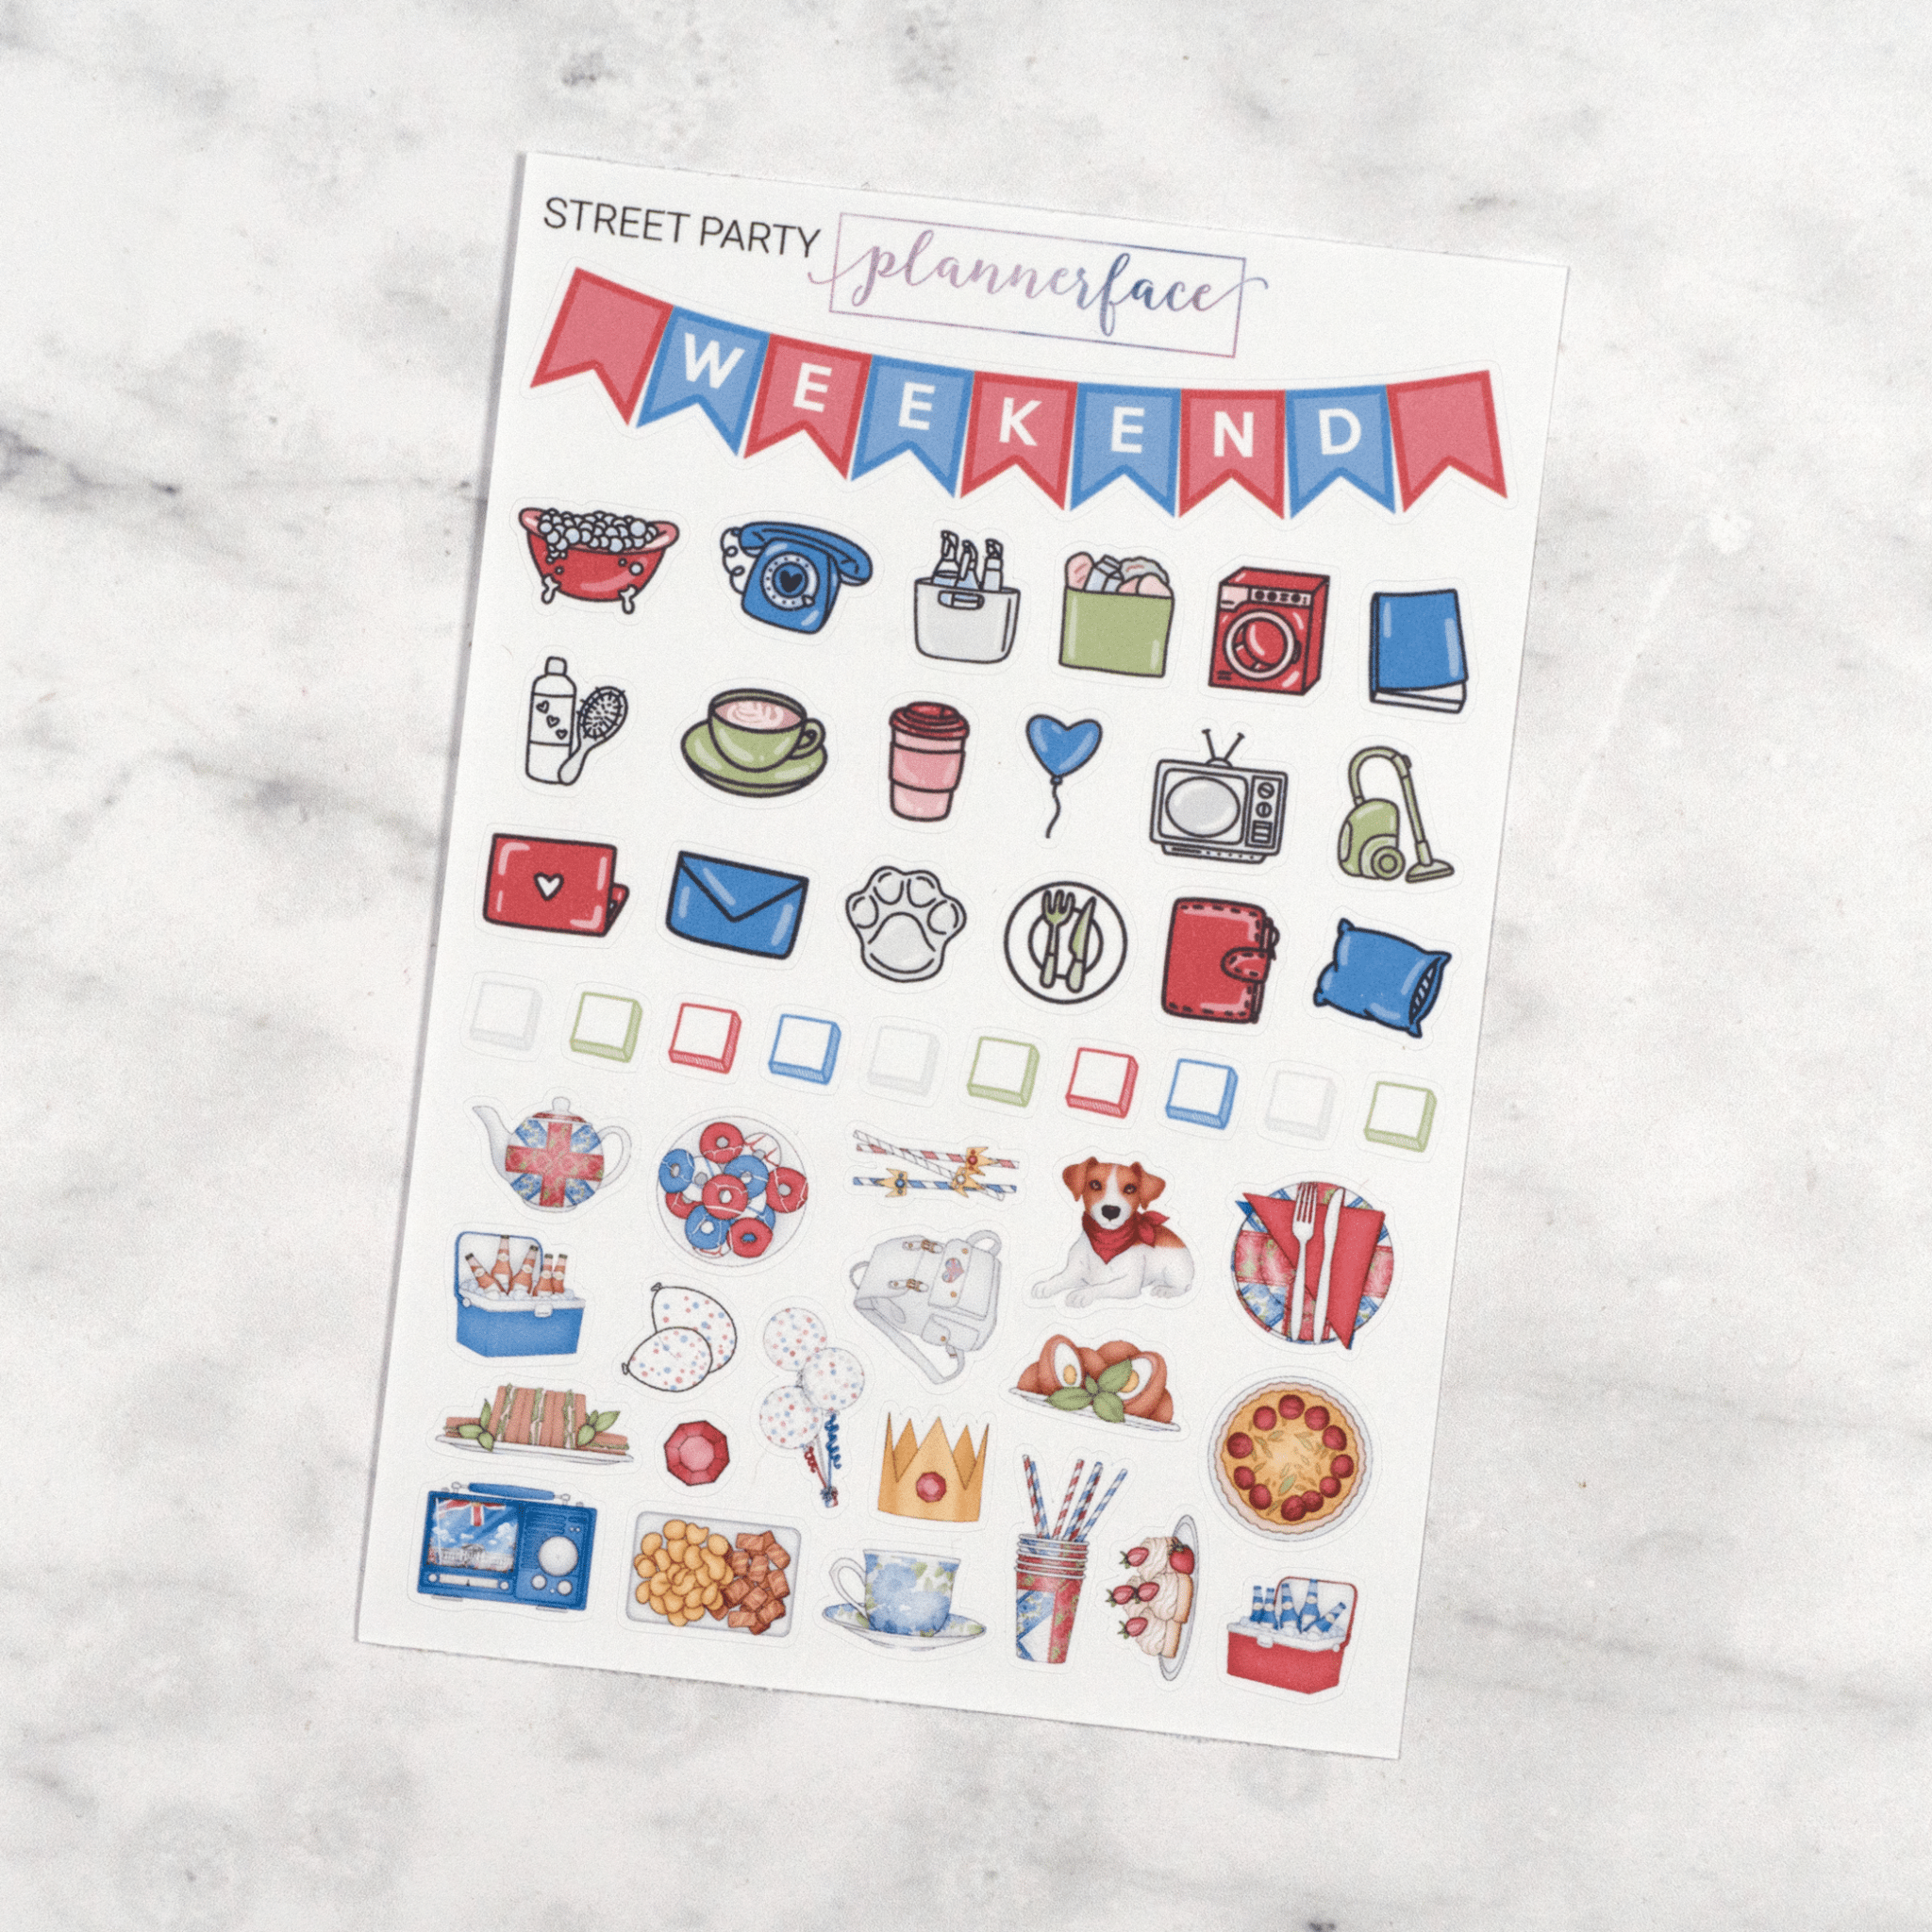 Street Party Weekly Kit by Plannerface